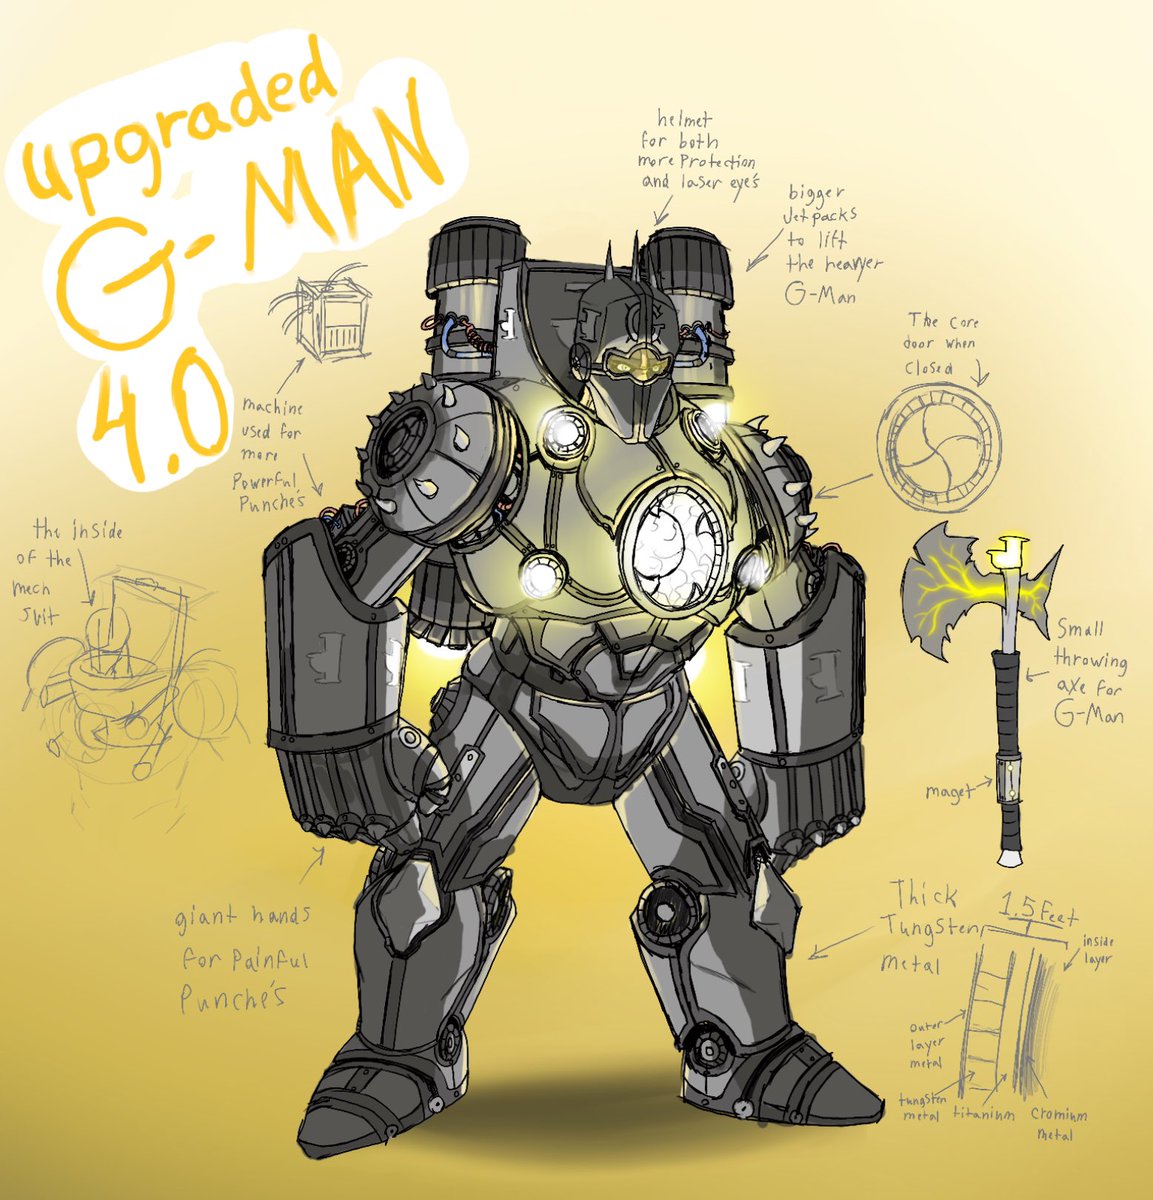 how to make g-man 4.0